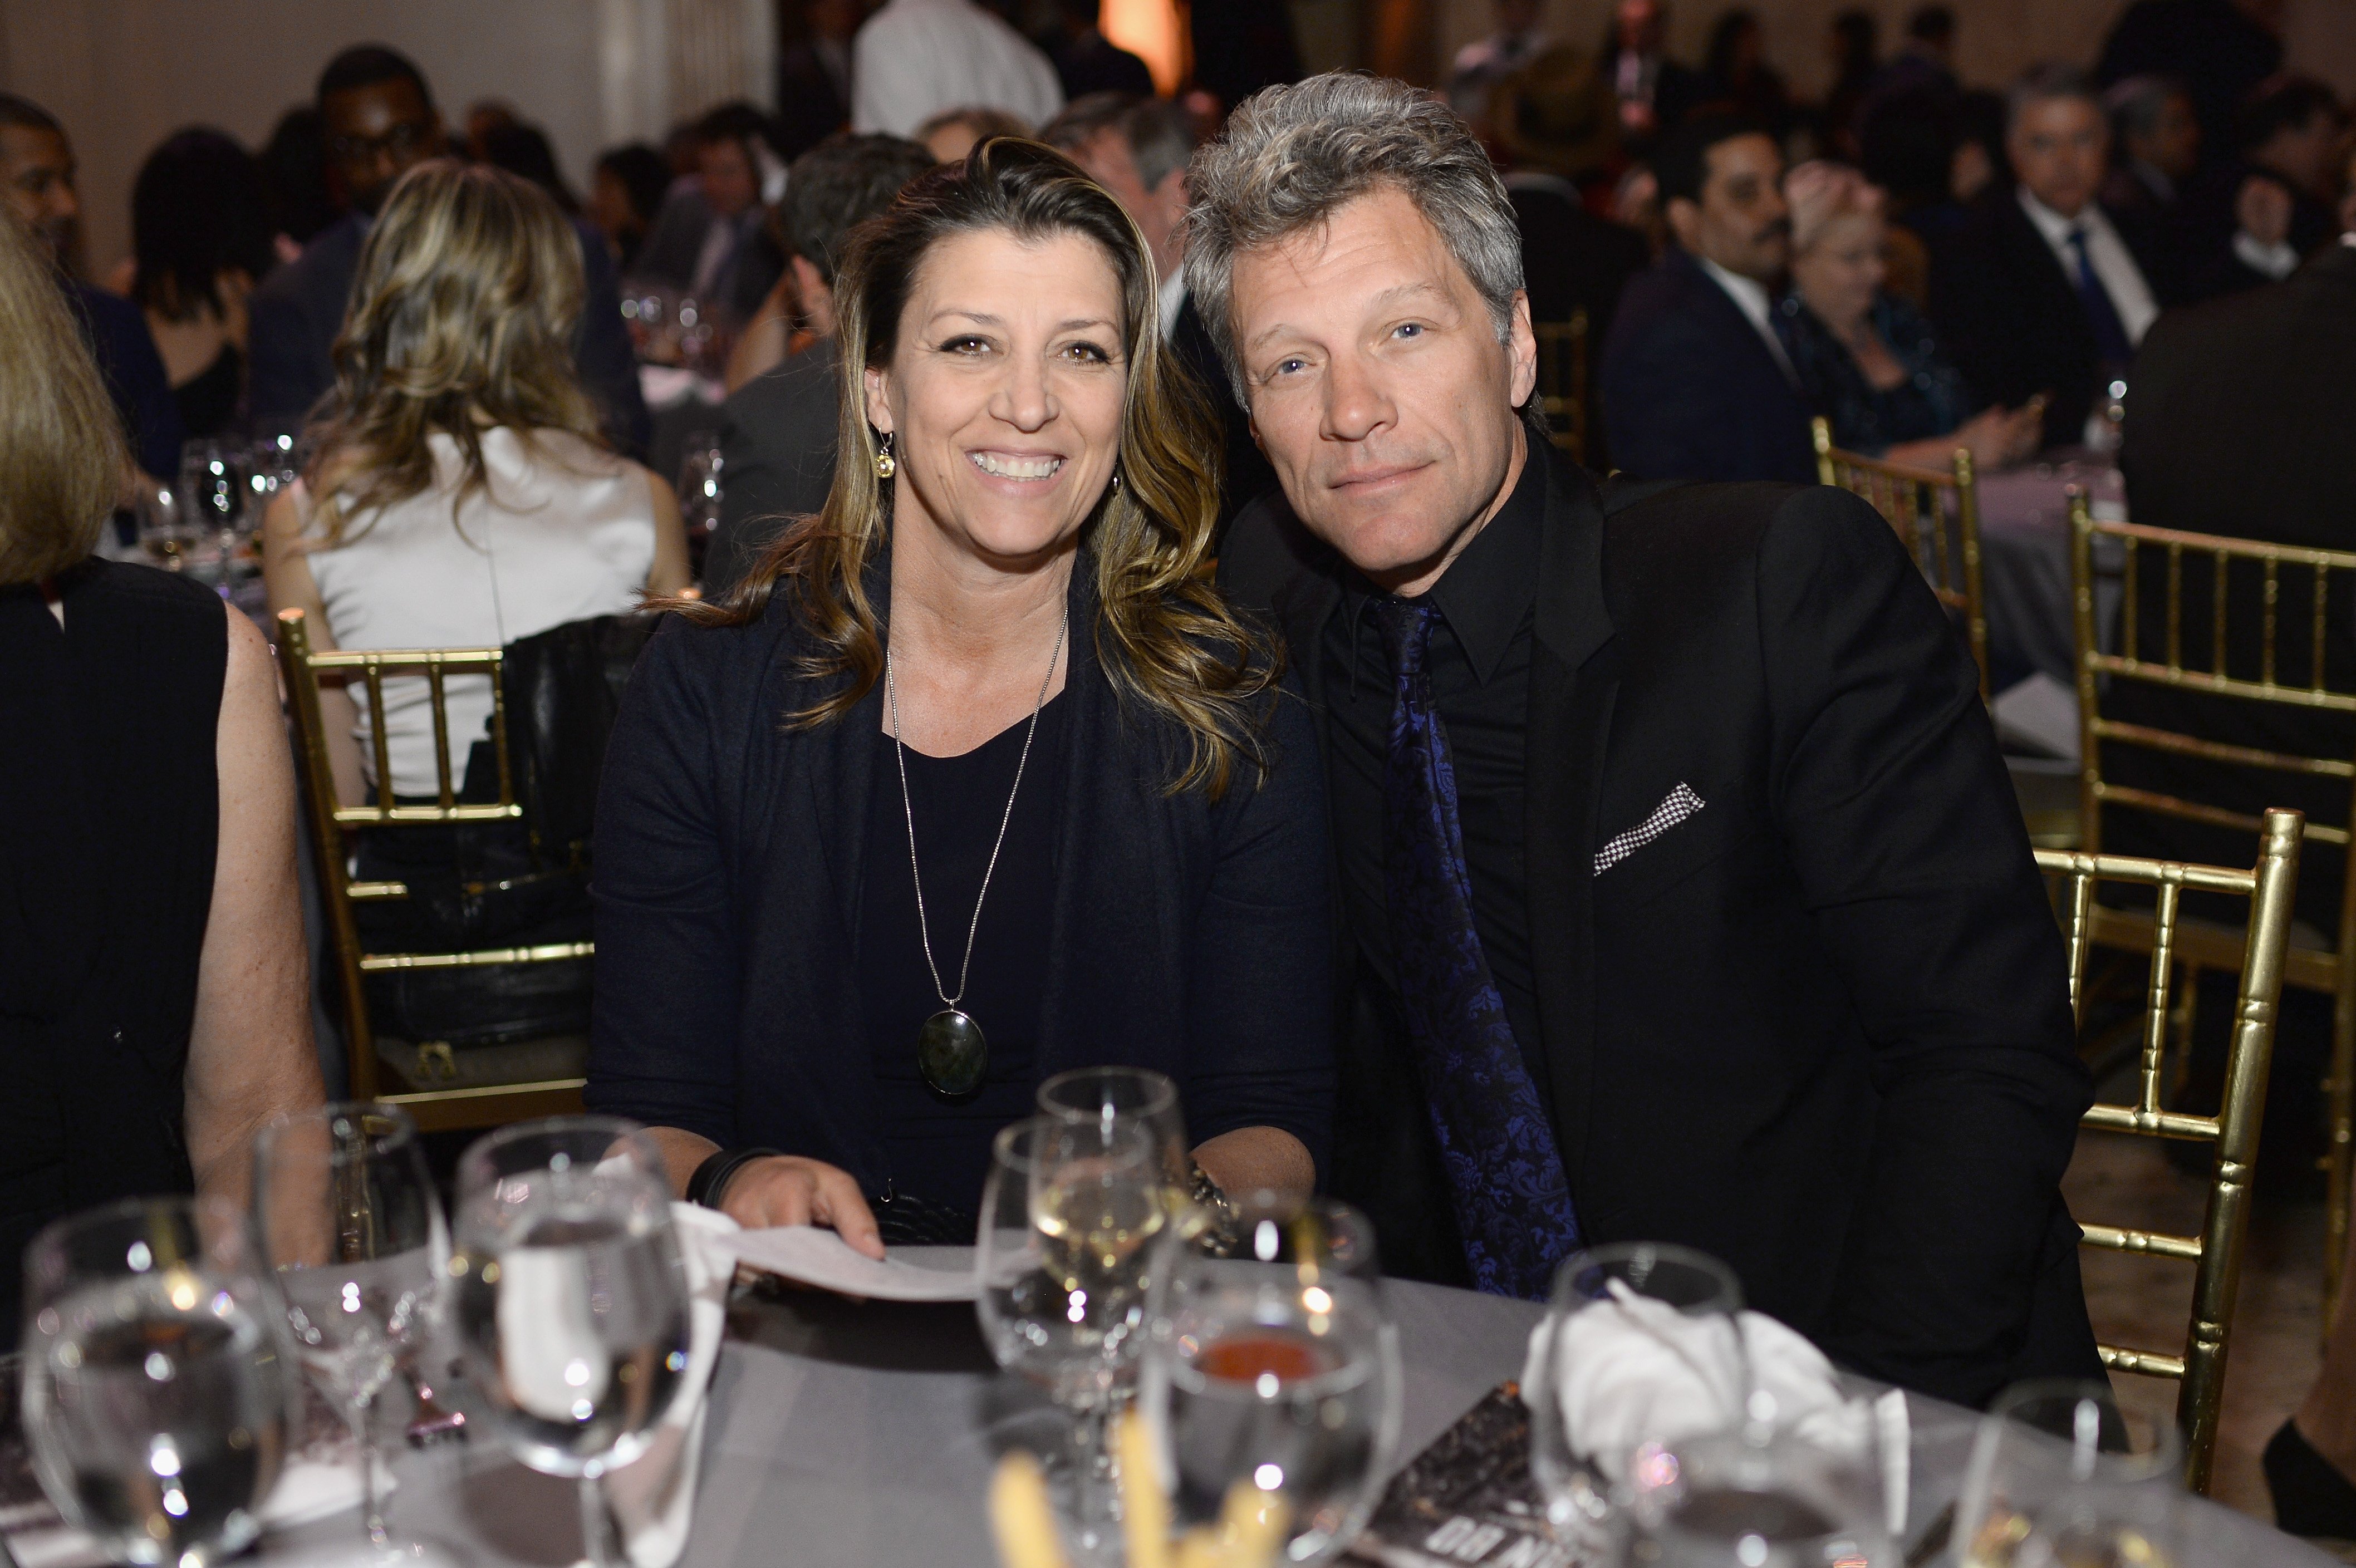 Dorothea Bongiovi and her husband Jon Bon Jovi during the Food Bank for New York City's Can Do awards dinner gala on April 9, 2014 in New York City. / Source: Getty Images